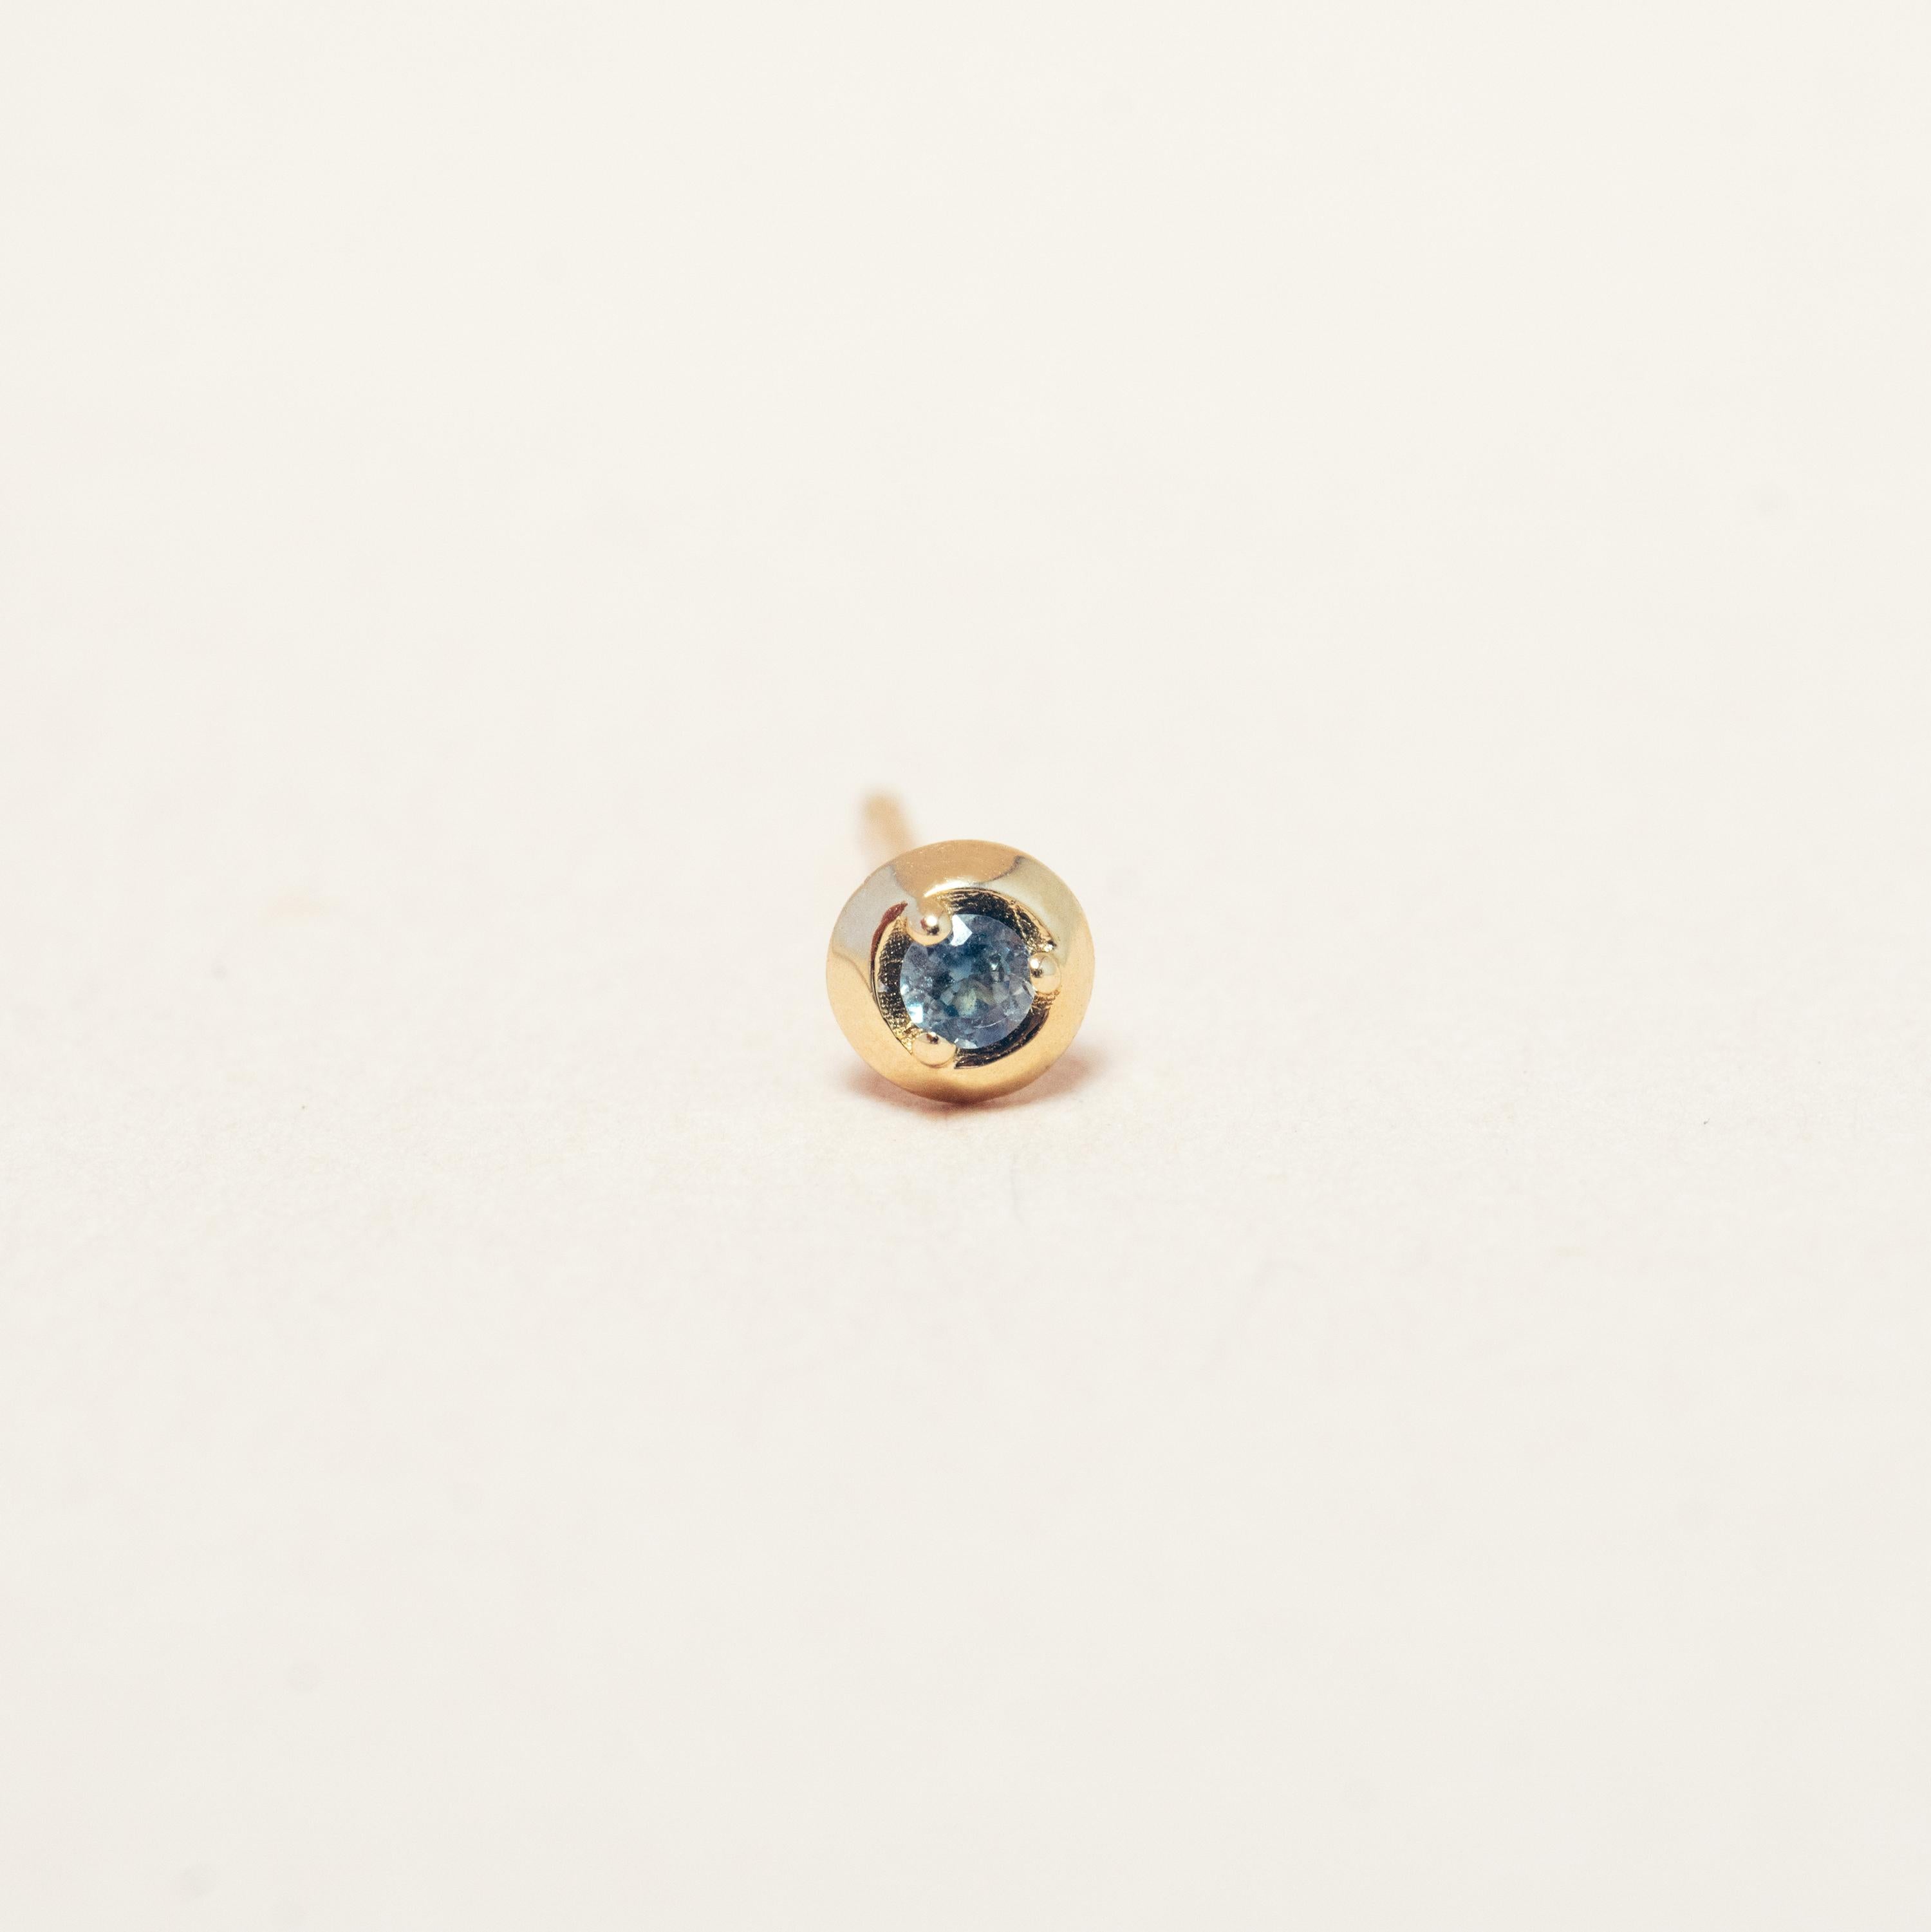 Sometimes the best things in life are the accents, the small gestures and textural pieces that add intentionality to our days. These Mini Formation Studs can pair well with larger earrings or stand well alone. The ethically mined Montana Blue